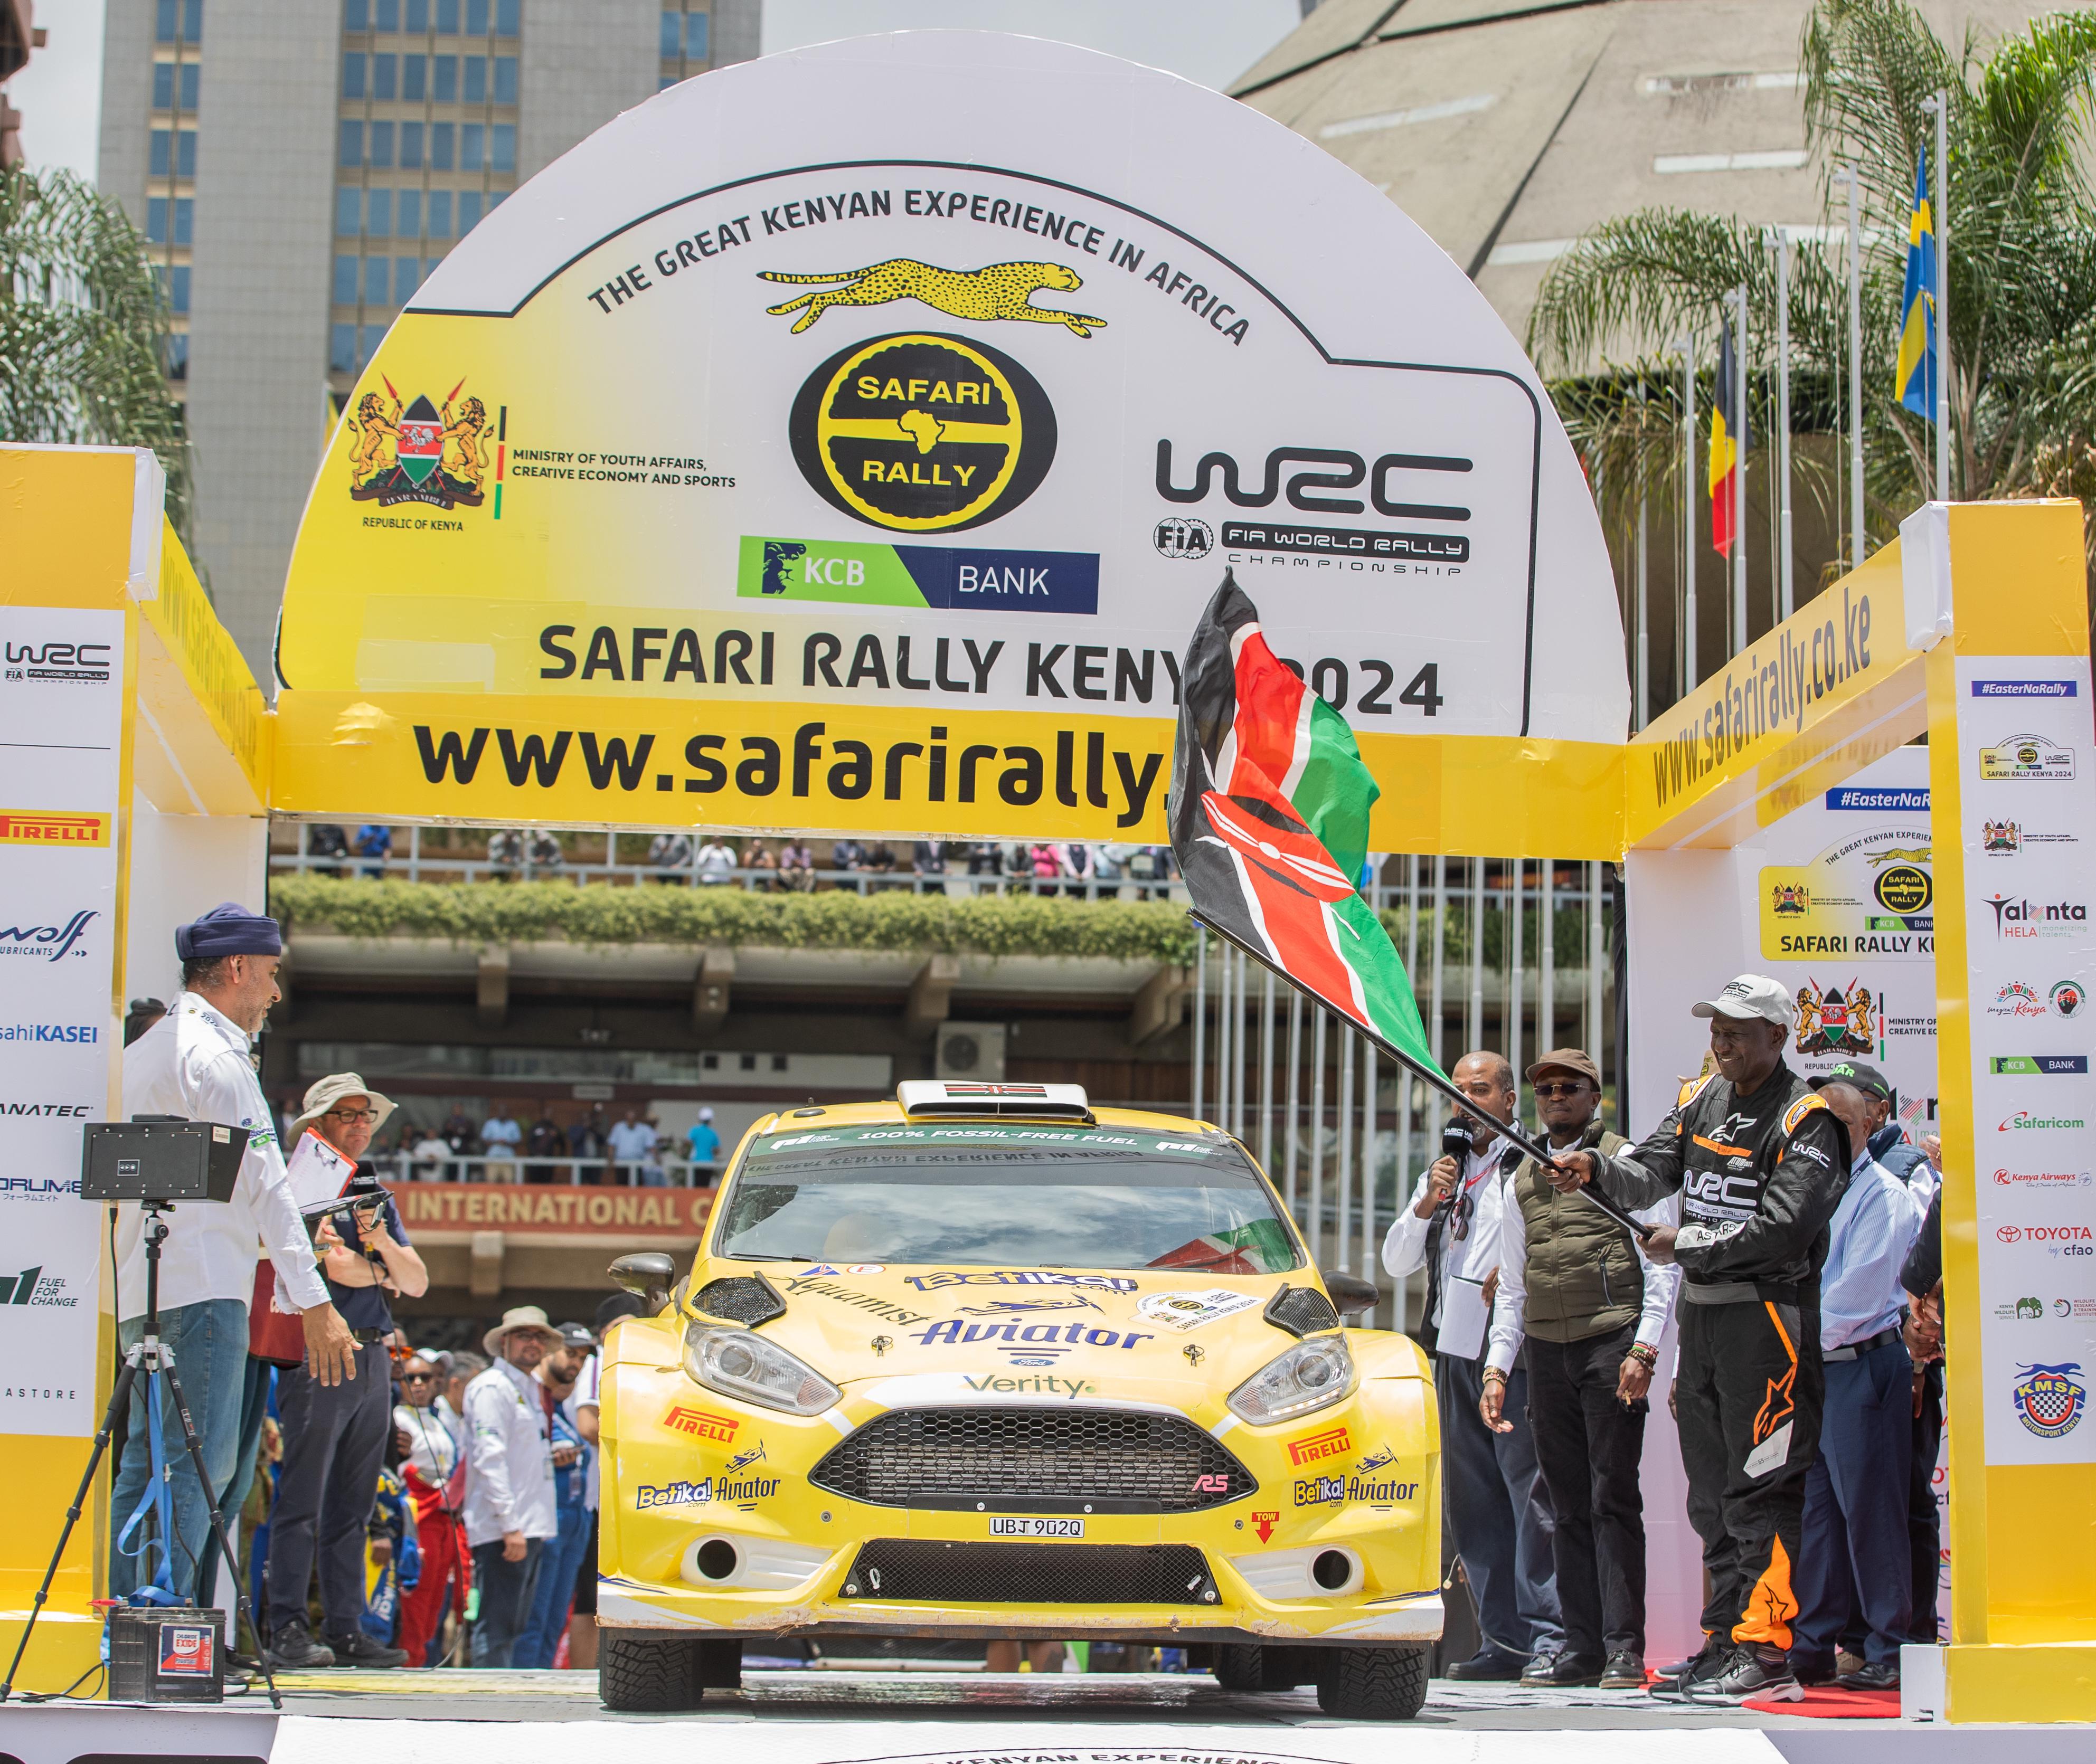 President William Ruto flags off the WRC rally at KICC, Nairobi.